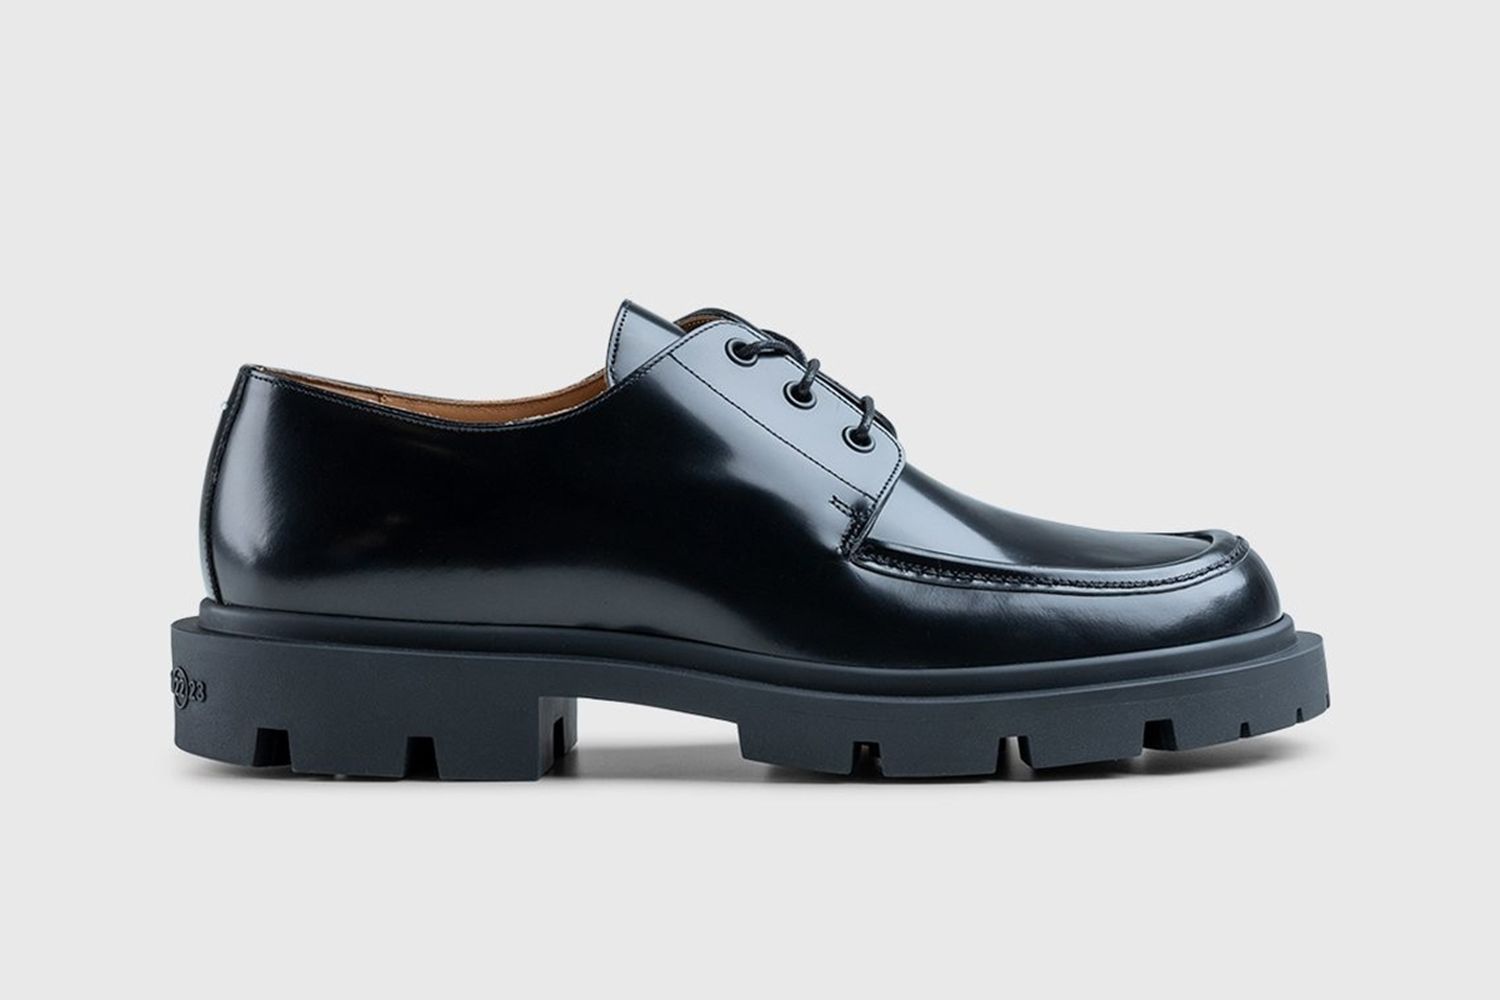 The Best Black Shoes for Men to Buy in 2021